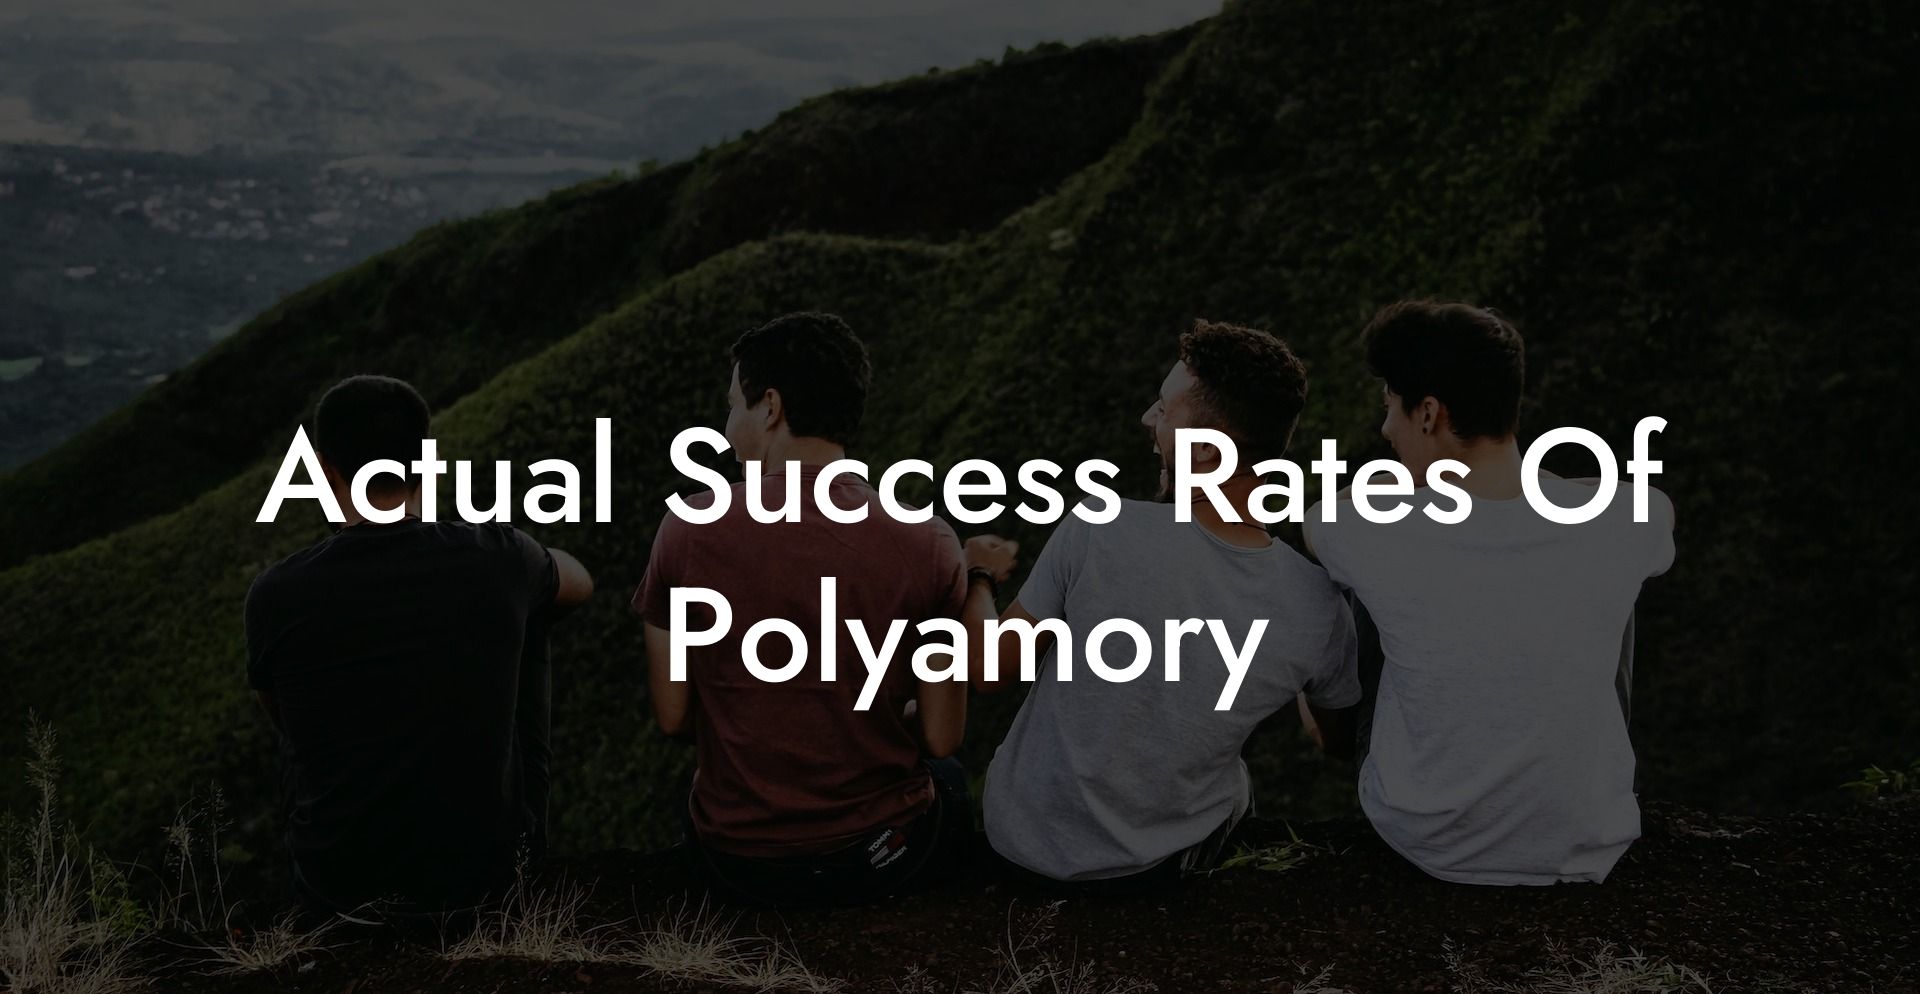 Actual Success Rates Of Polyamory